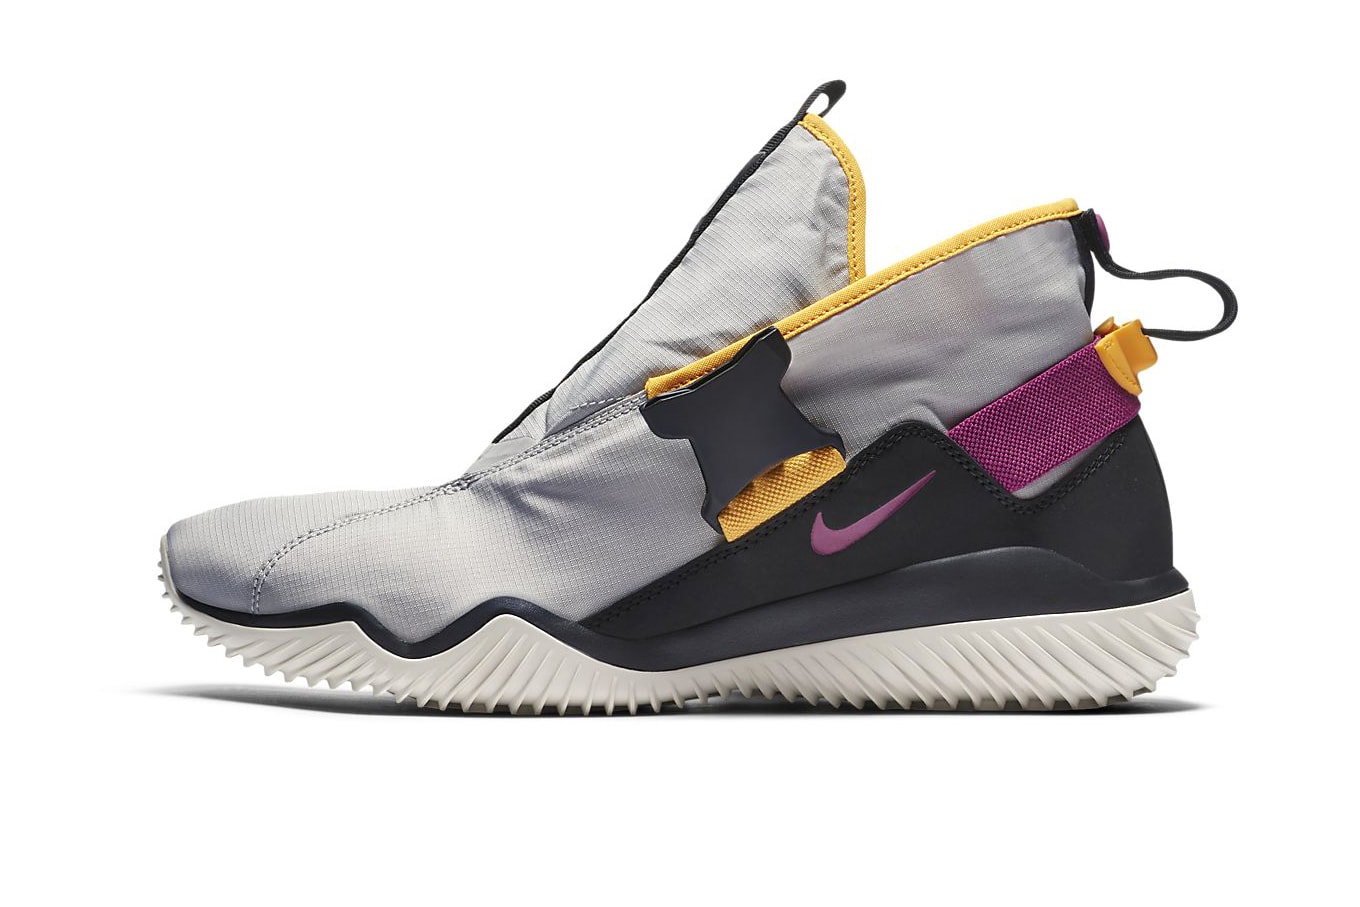 Nike Komyuter ESS "Pro Gold/Rave Pink" Release ACG Colorway Official Look release info price purchase sneaker footwear Granite Black Pro Gold Rave Pink military inspired kicks